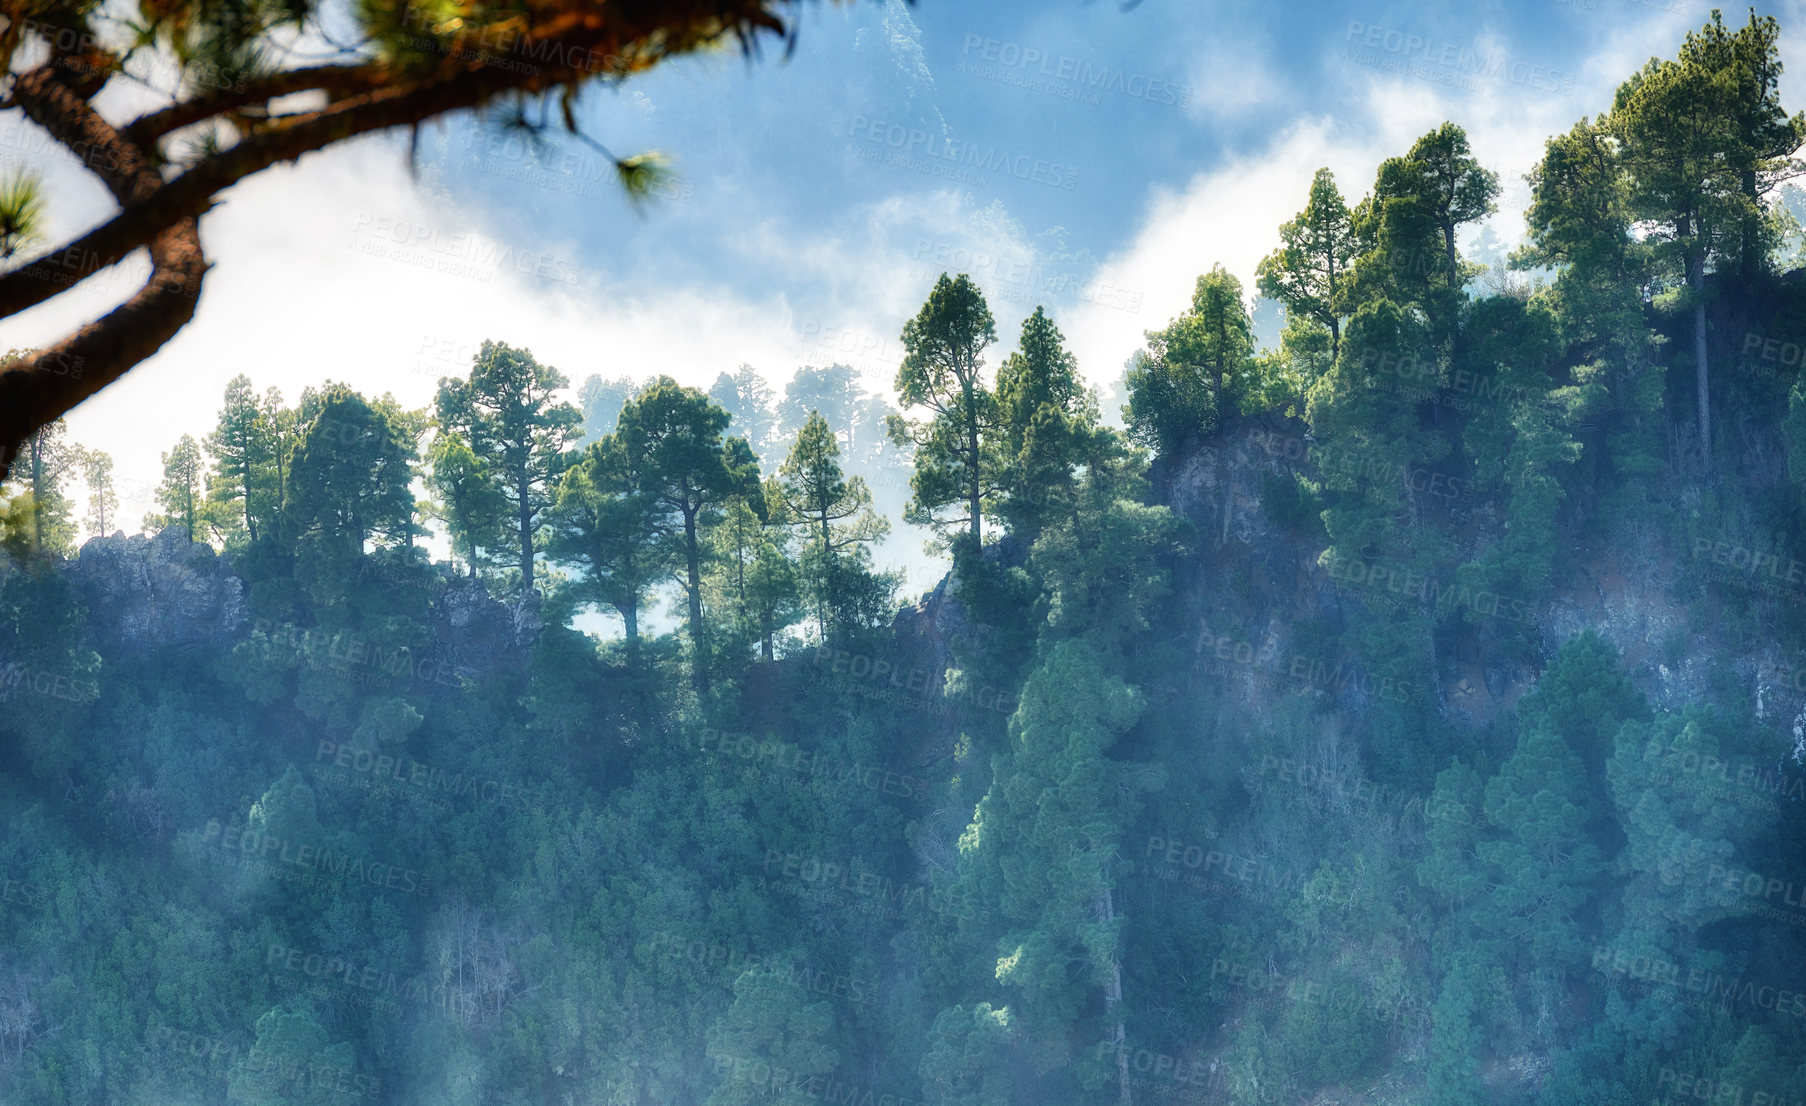 Buy stock photo Landscape of a pine tree forest in the mountain. Misty nature scenery with trees and lush green plants or bushes in an eco friendly environment on the mountains of La Palma, Canary Islands, Spain